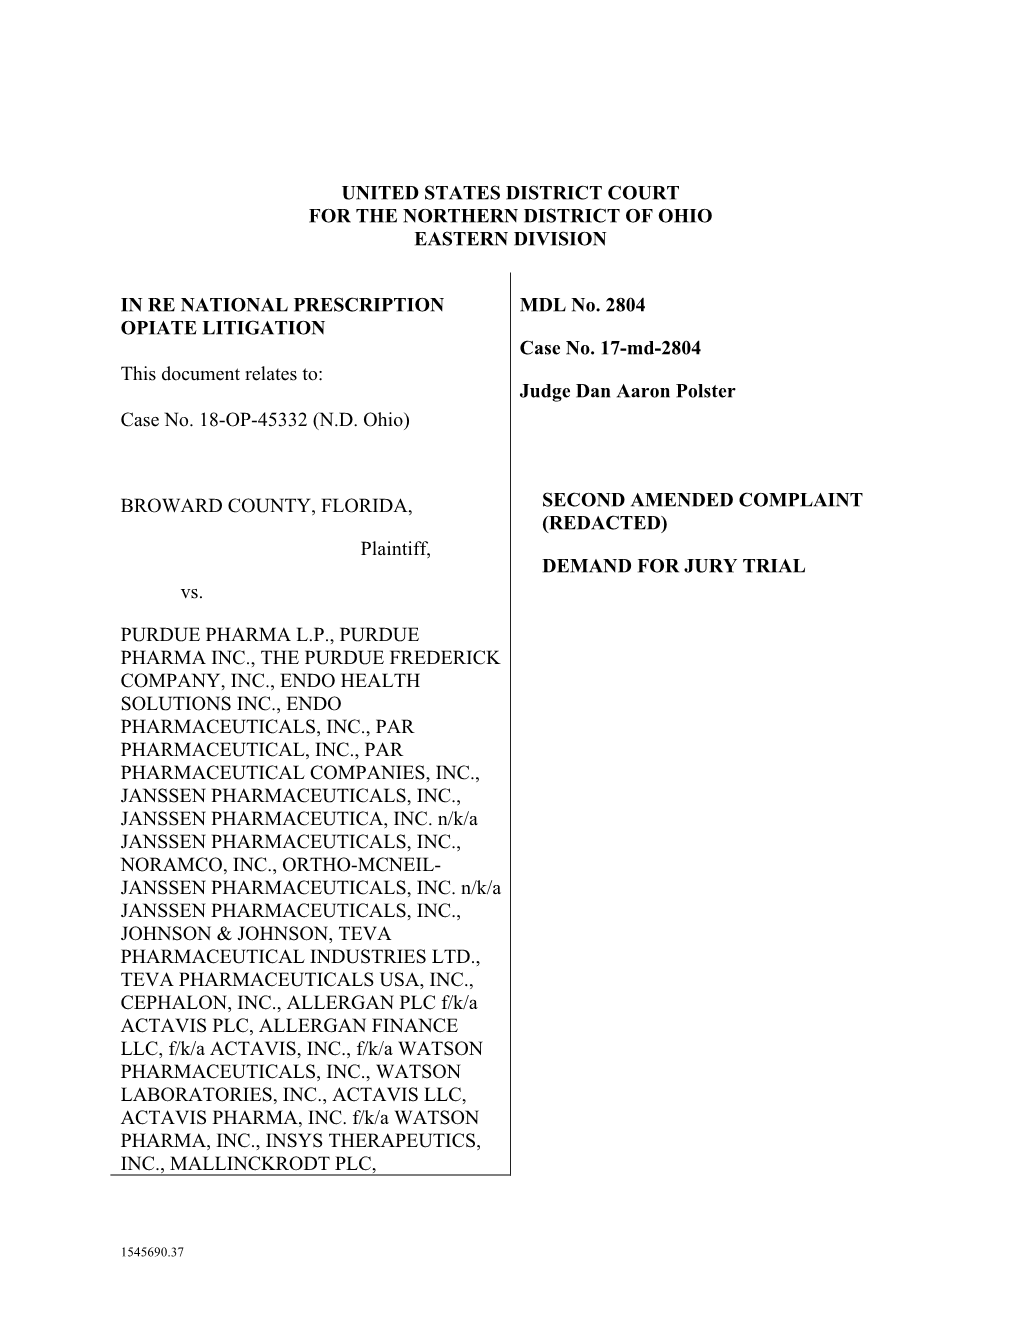 BROWARD COUNTY, FLORIDA, SECOND AMENDED COMPLAINT (REDACTED) Plaintiff, DEMAND for JURY TRIAL Vs